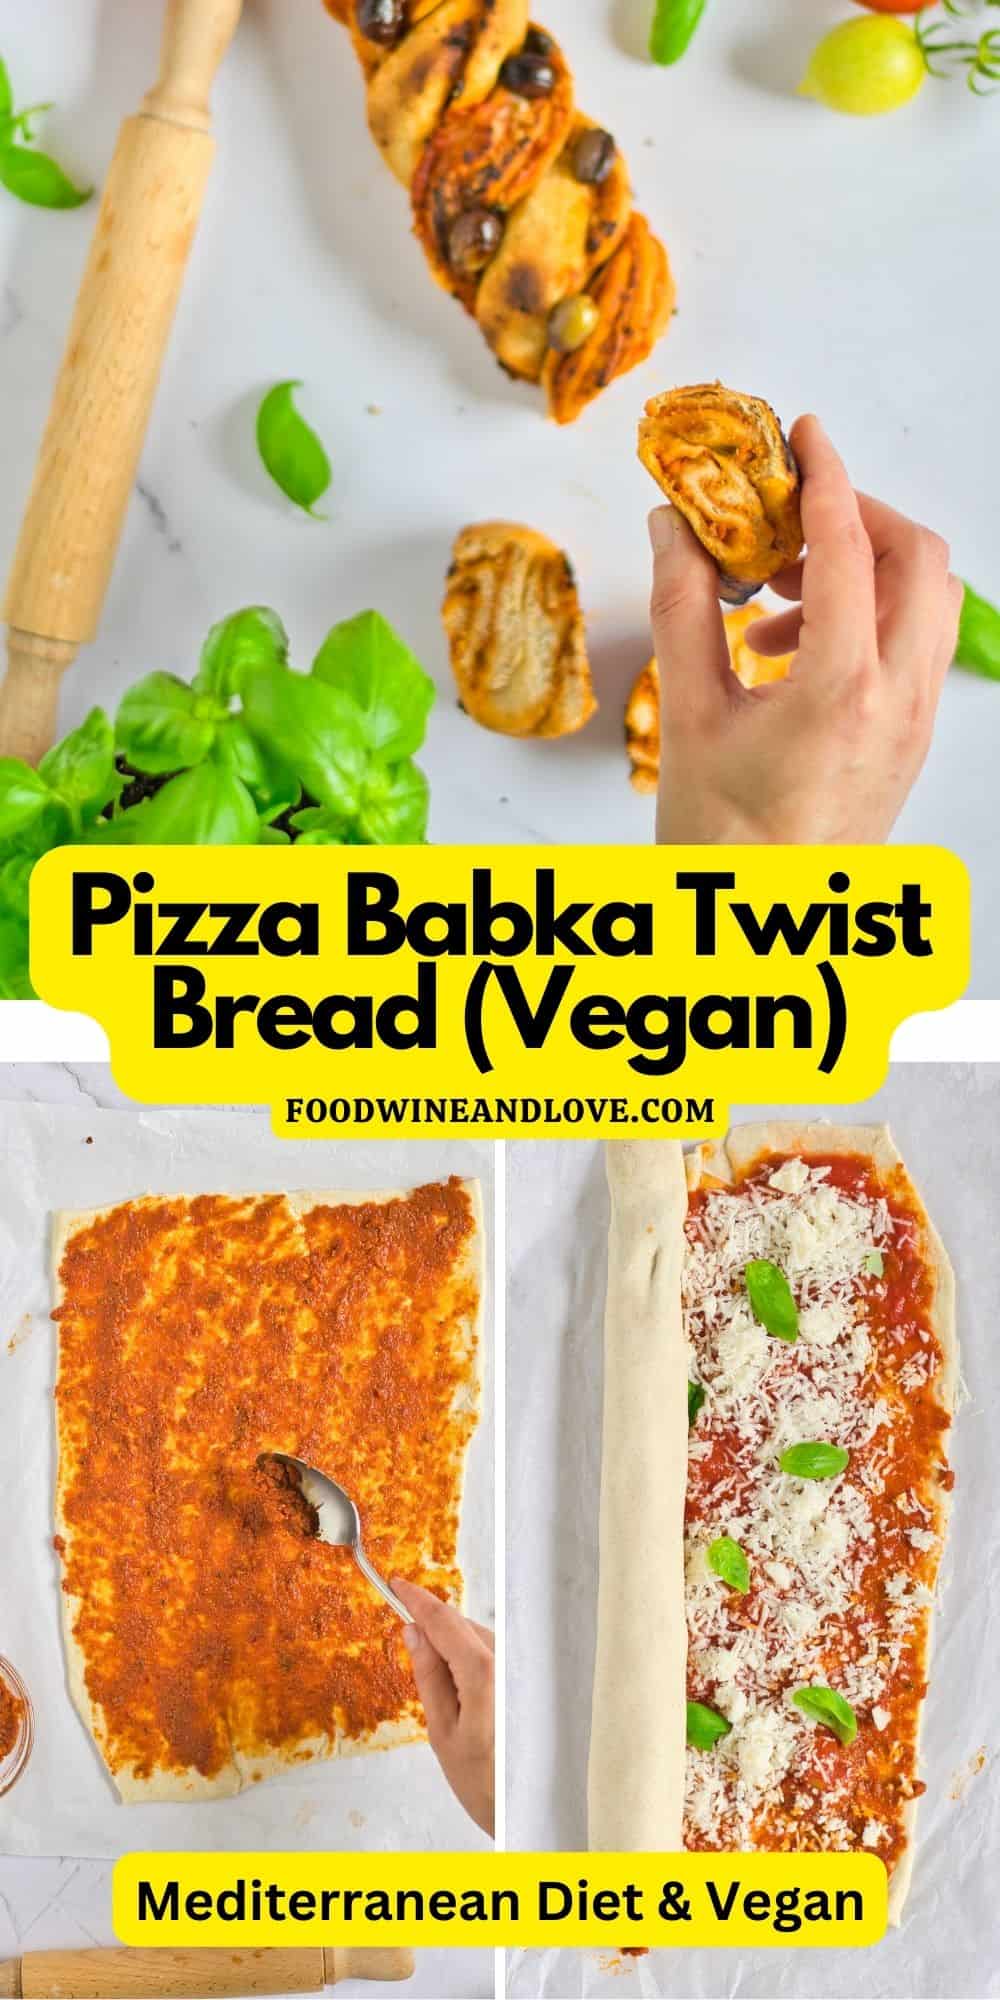 Pizza Babka Twist Bread, an easy and delicious recipe for pizza dough stuffed with toppings and then baked as a babka. Vegan or Vegetarian